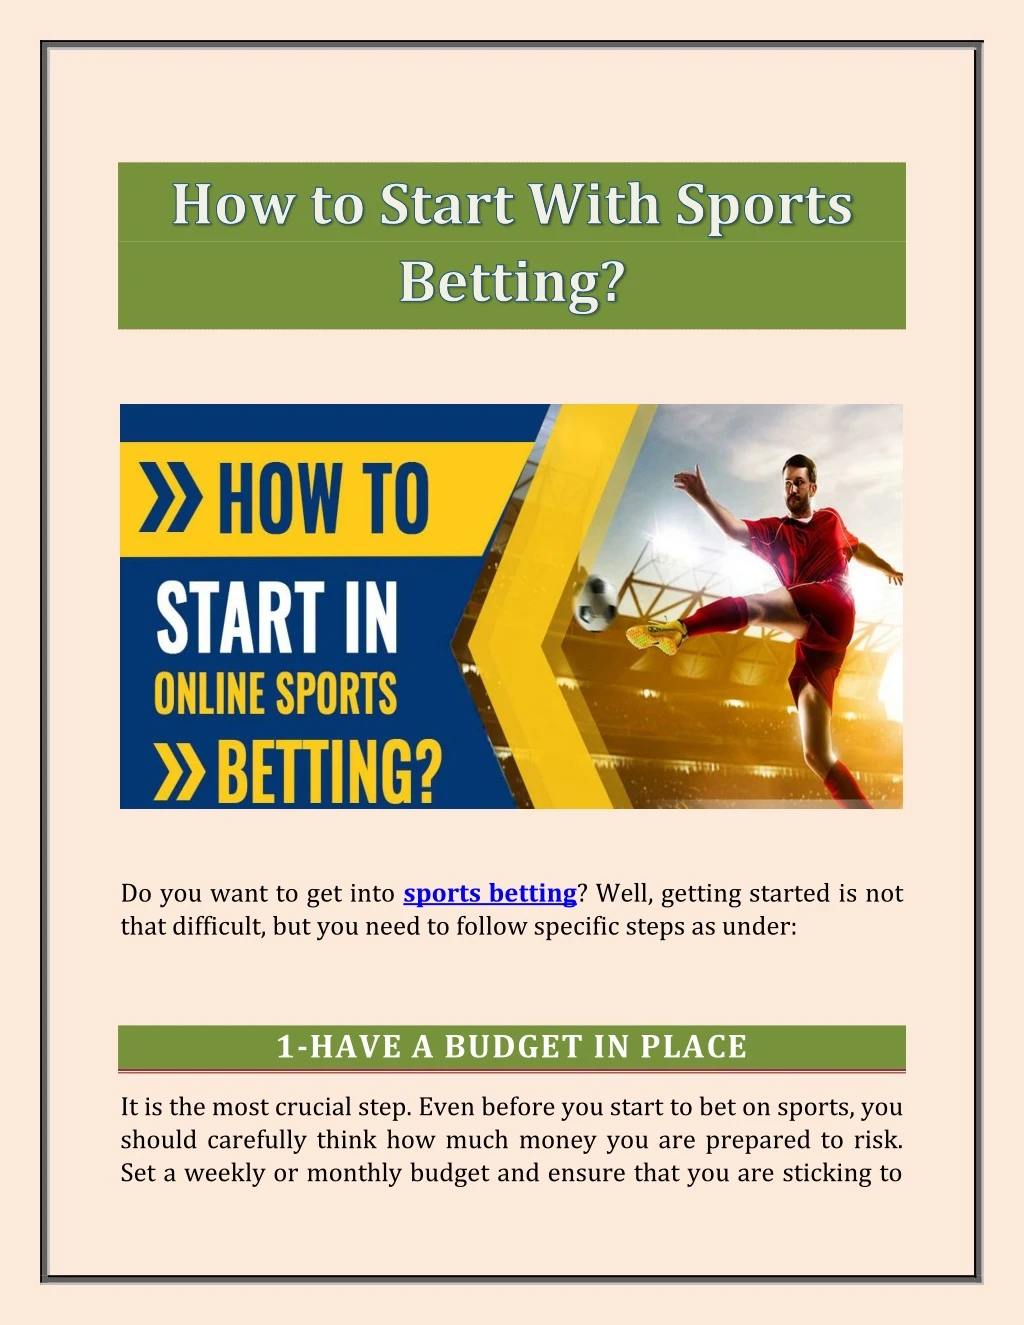 do you want to get into sports betting well